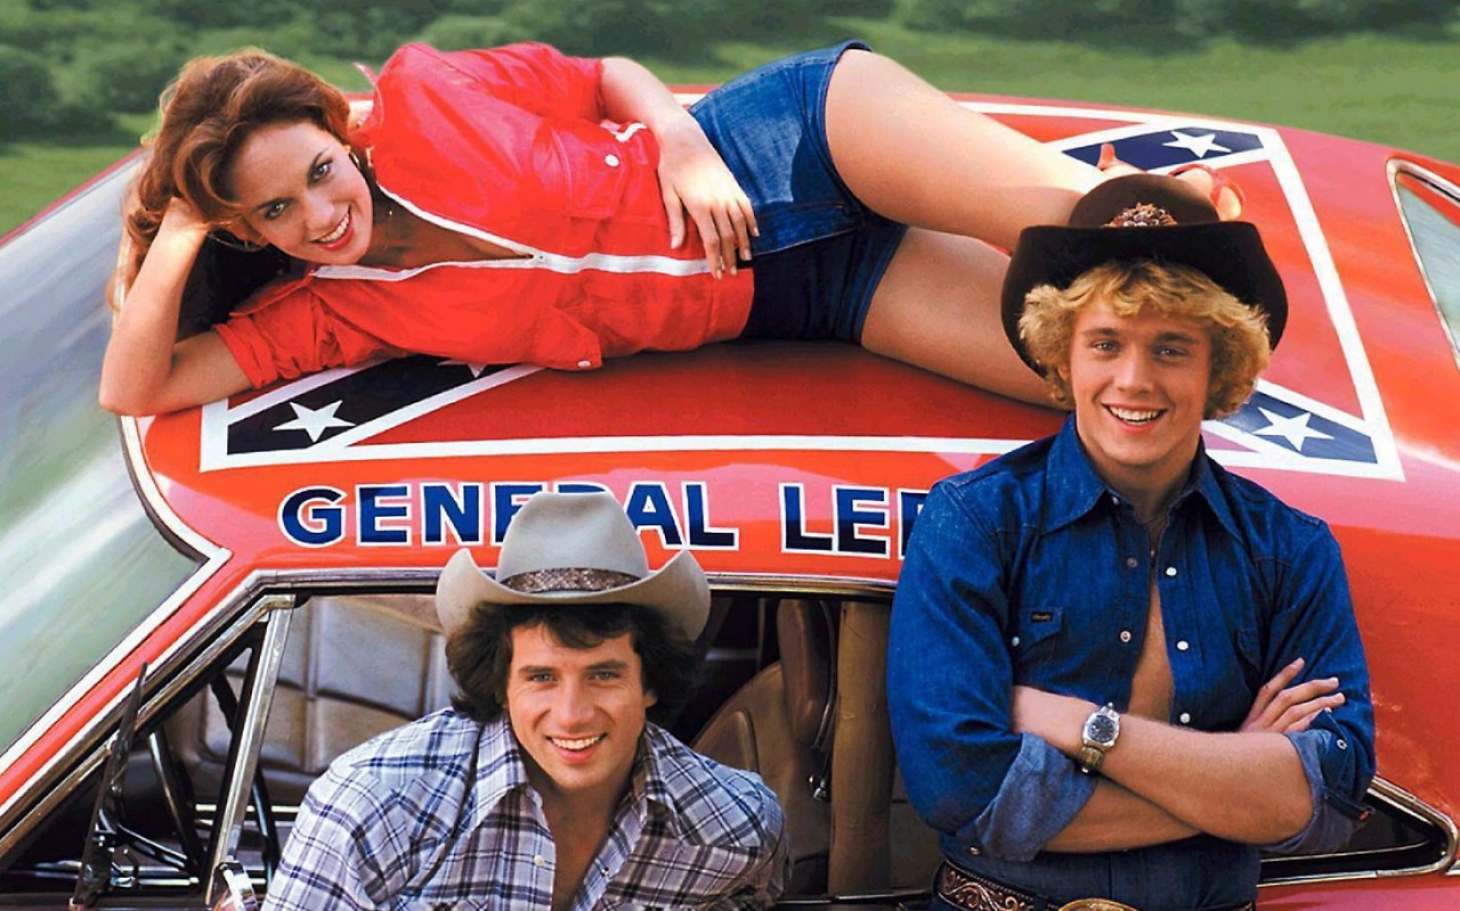 Facts You Didn’t Know about The Original Dukes of Hazzard.